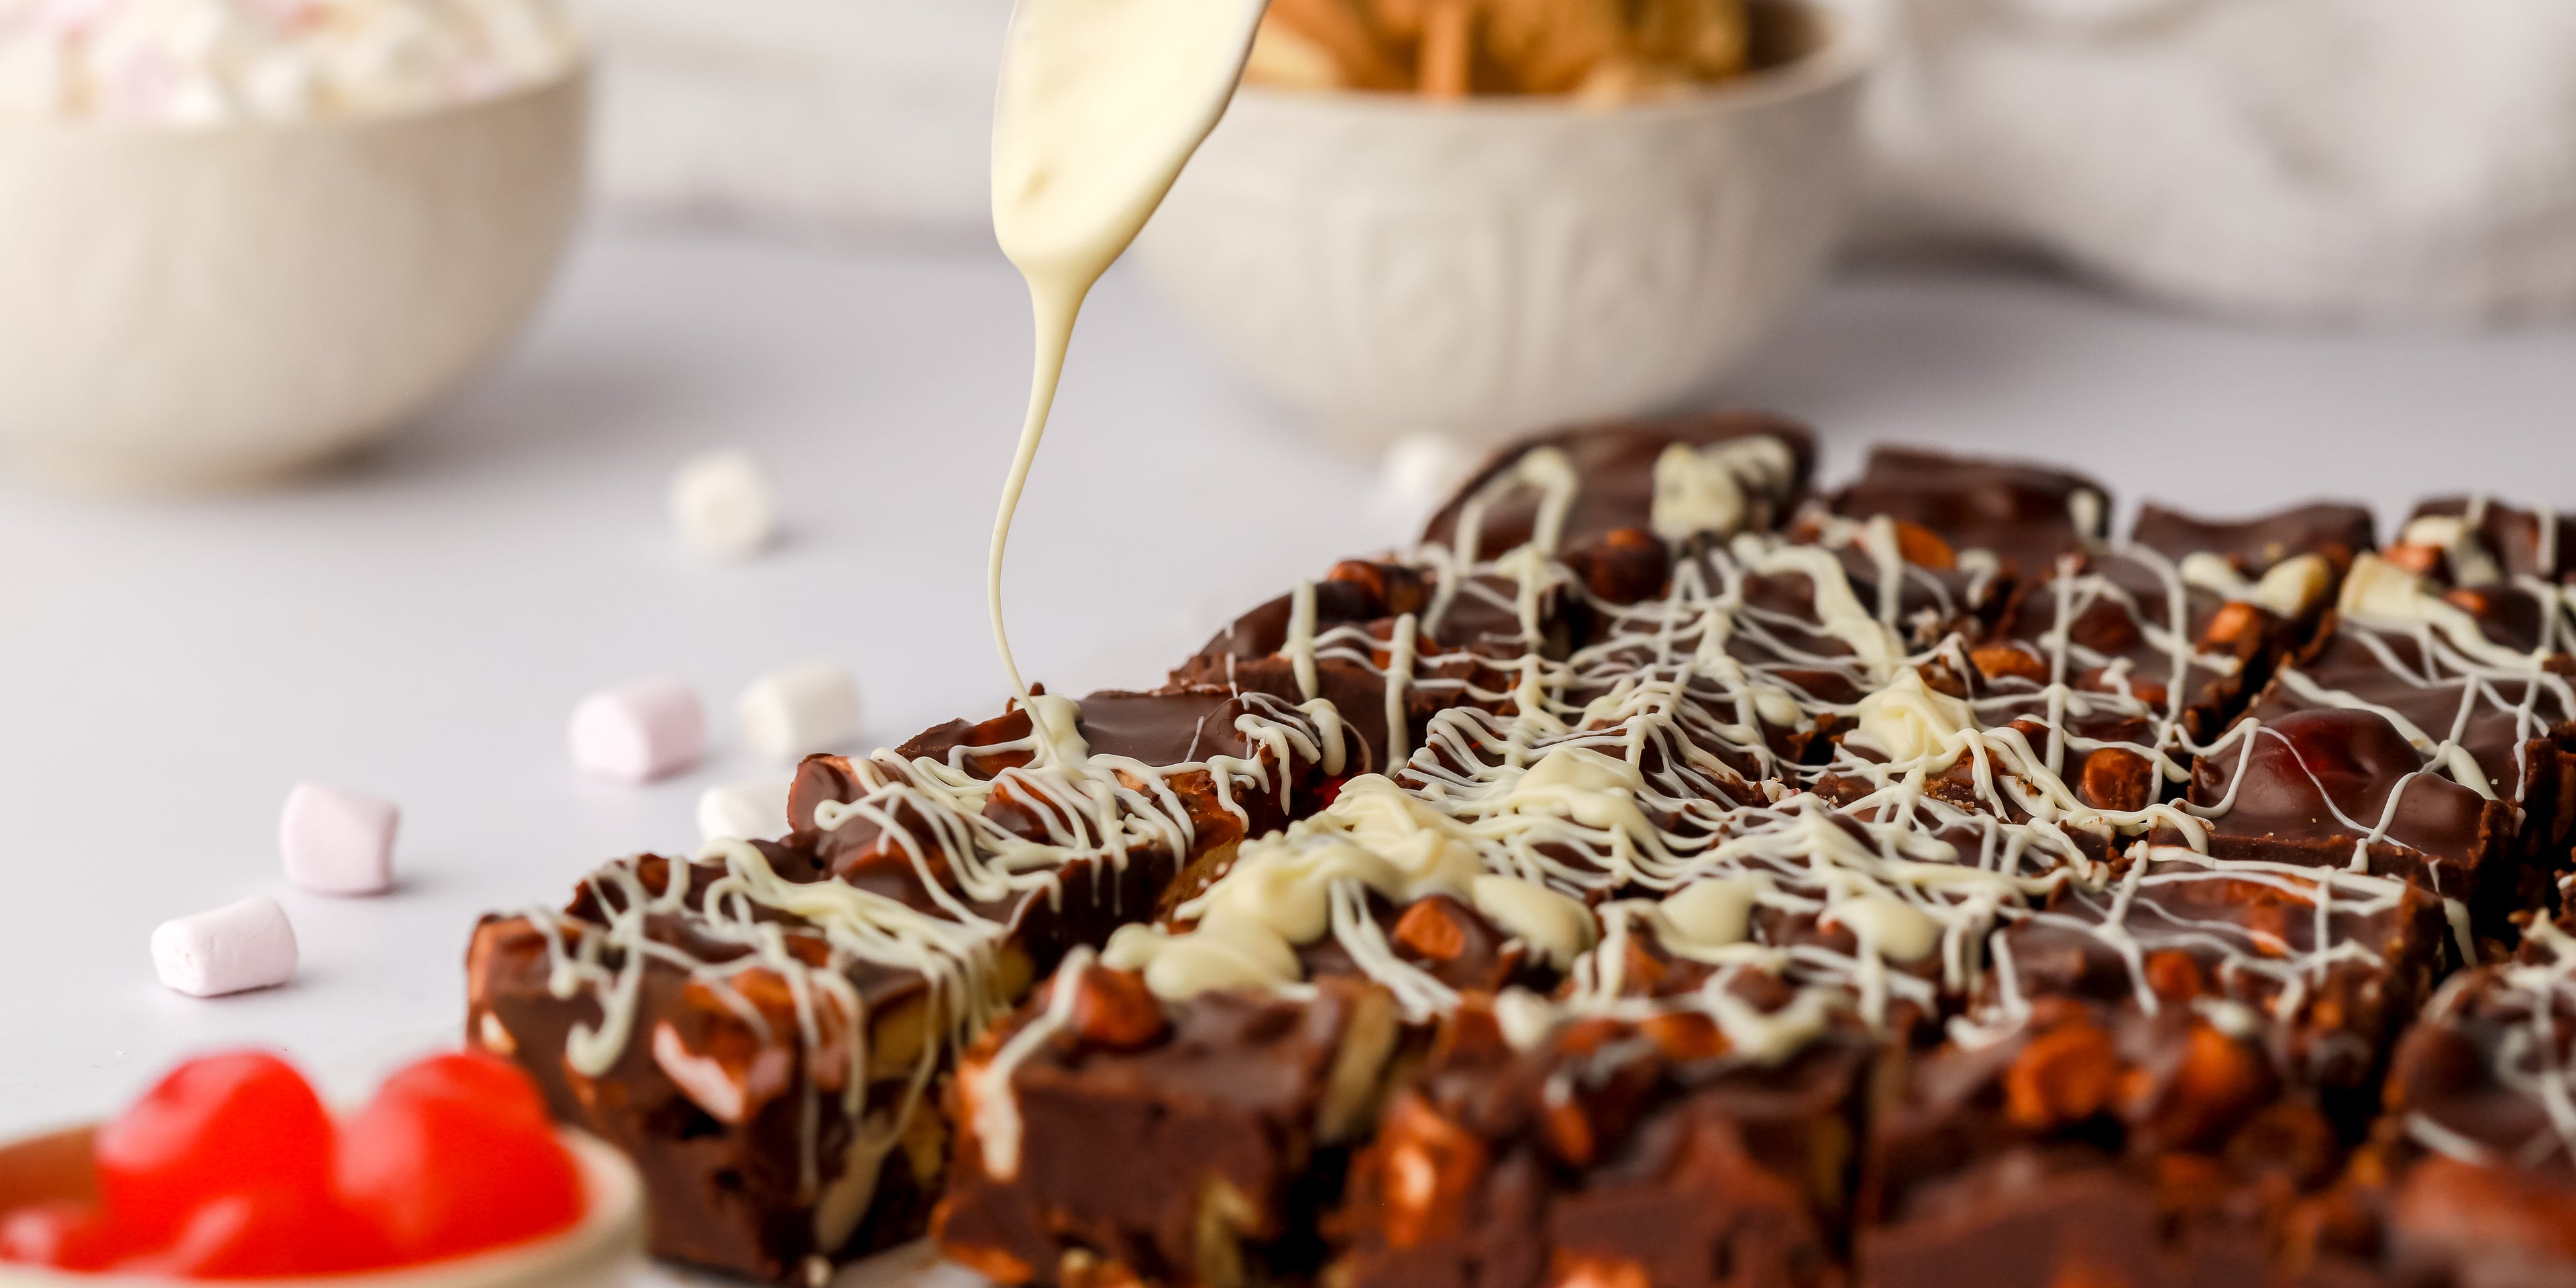 White chocolate being drizzled on top of rocky road